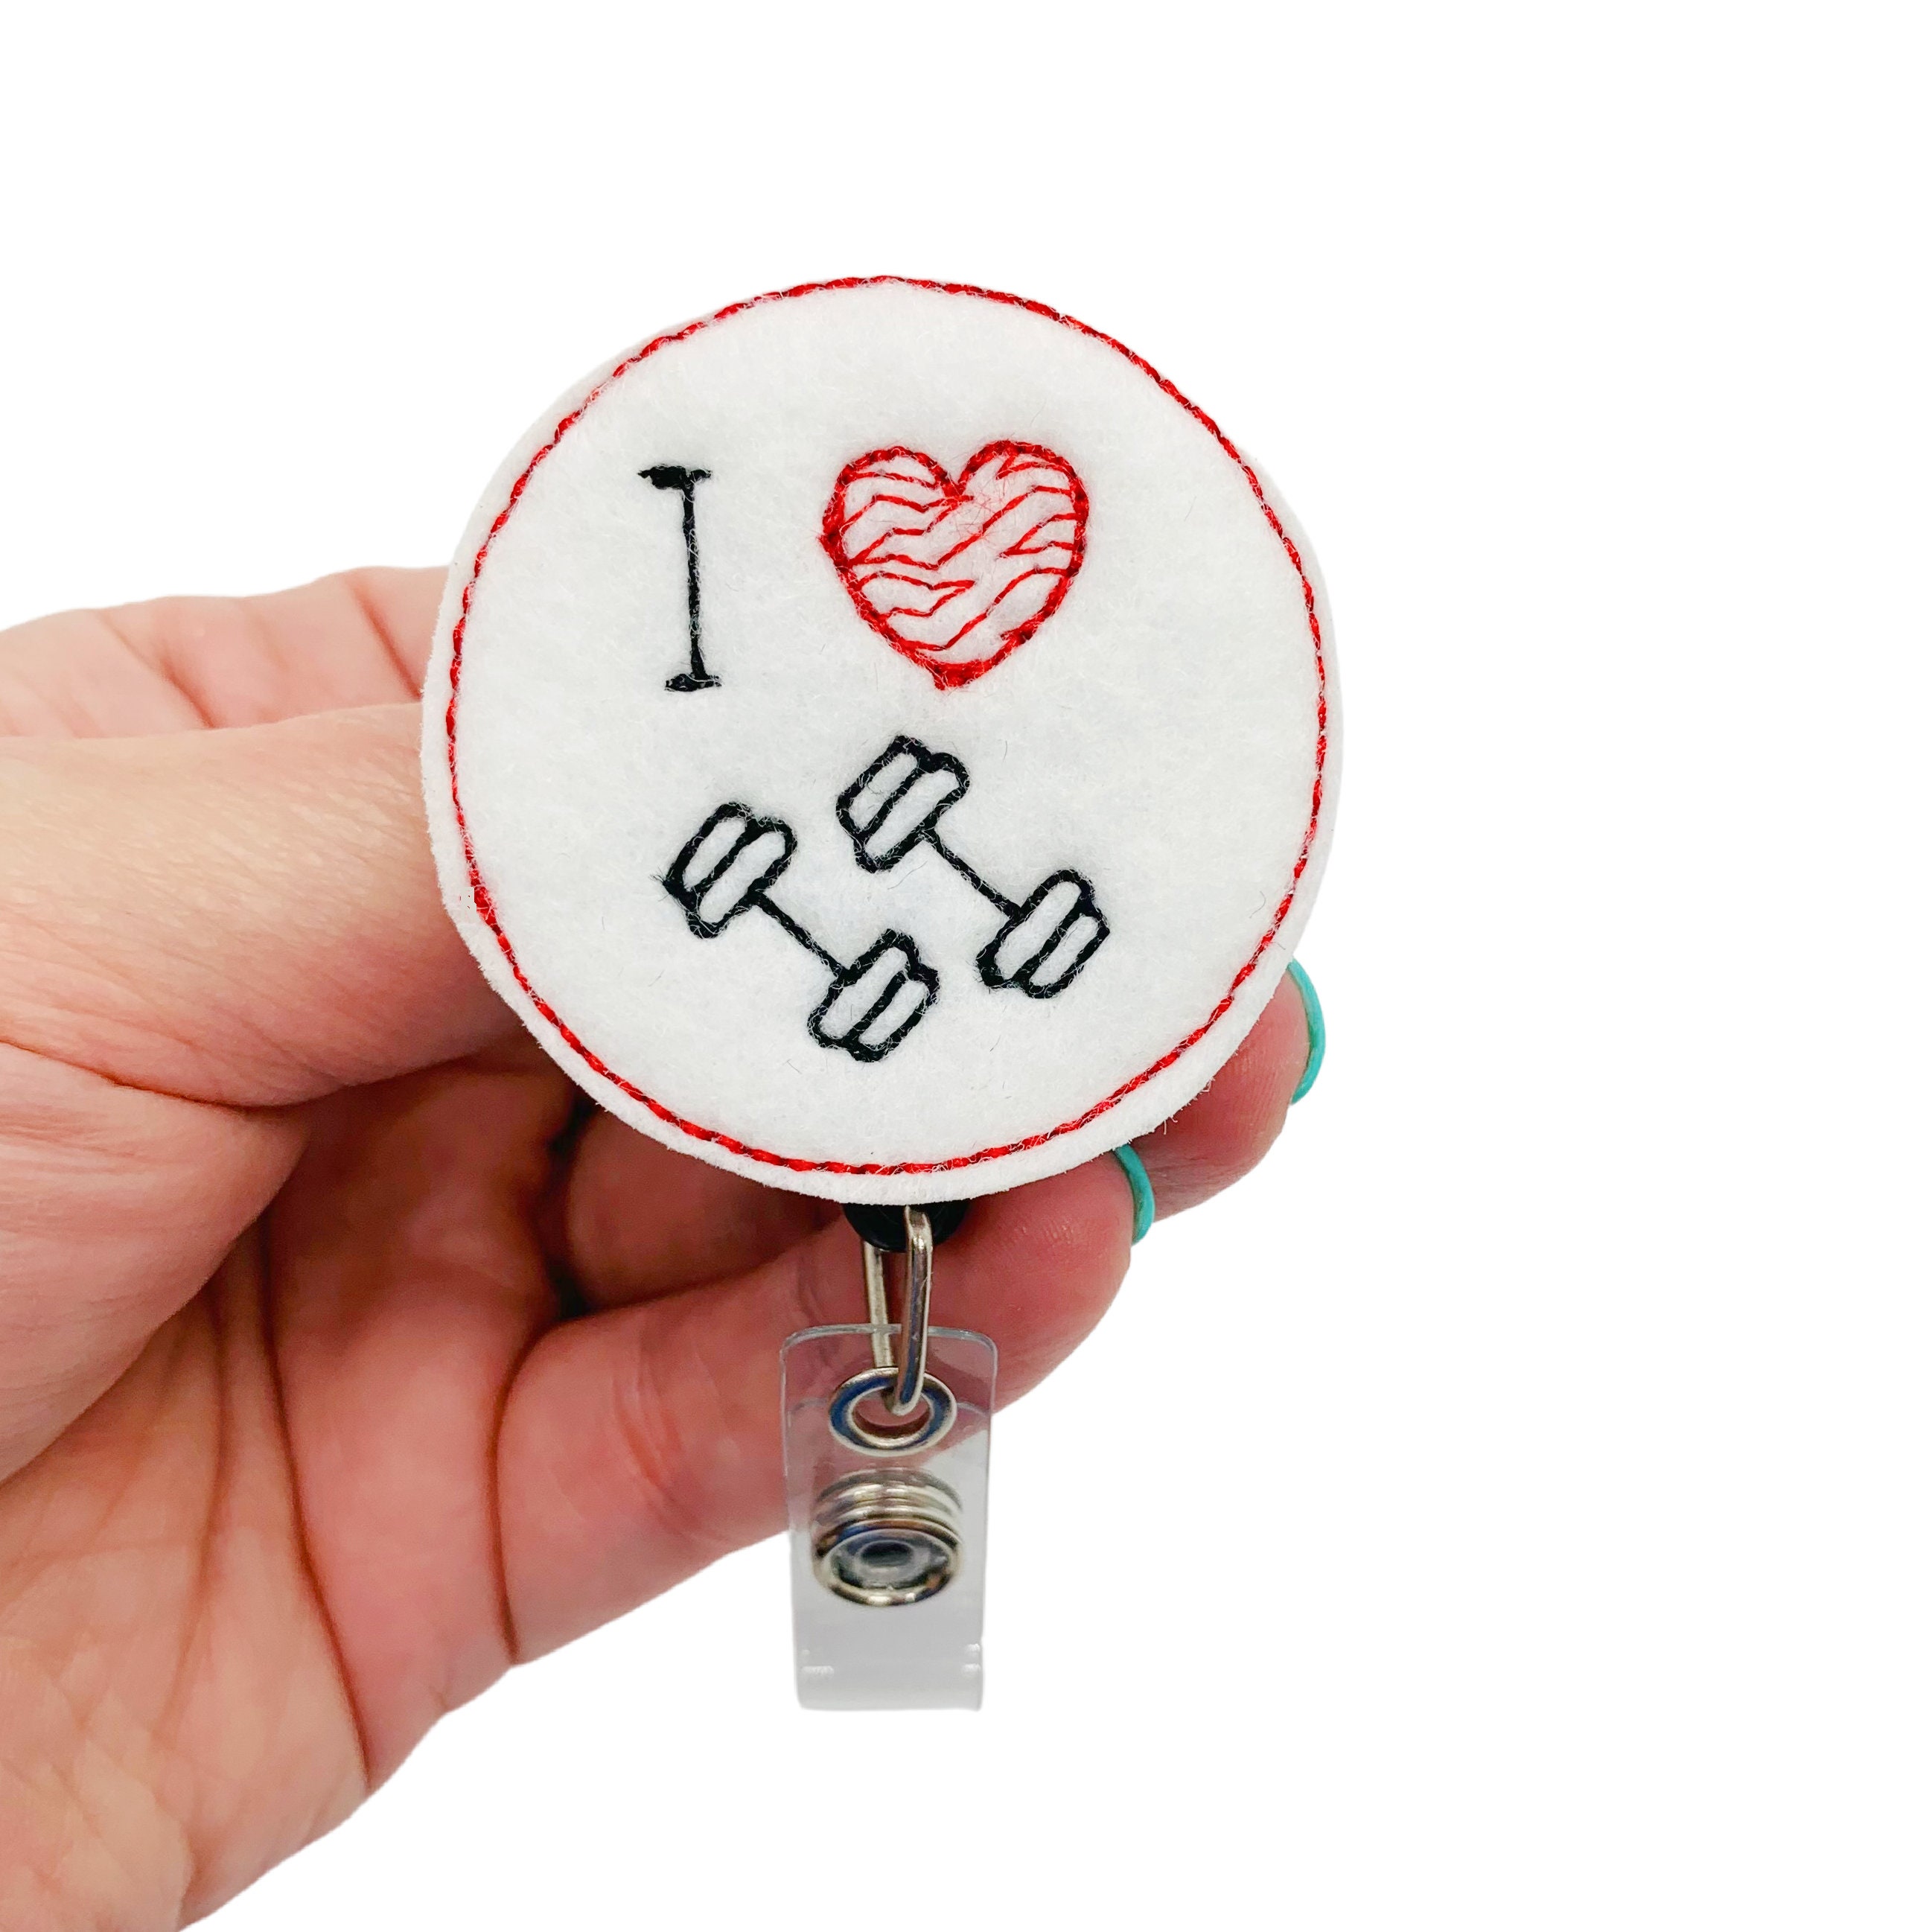 Workout Badge Reel Retractable Name Tag Holder for Work ID